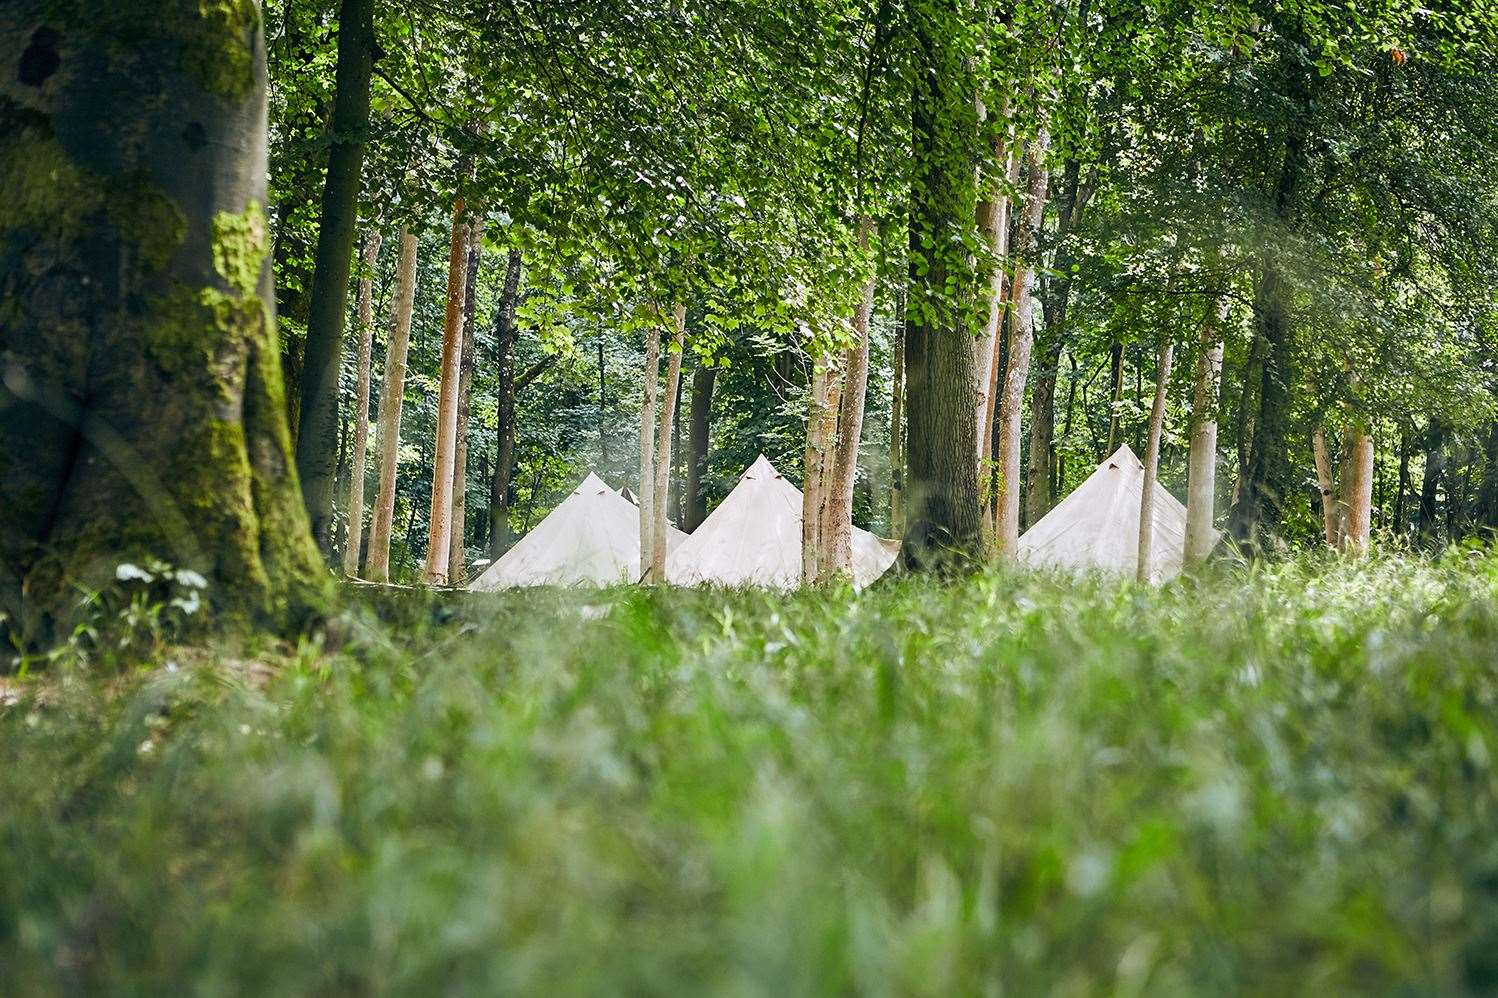 Camp Wilderness which will come to Penshurst Place